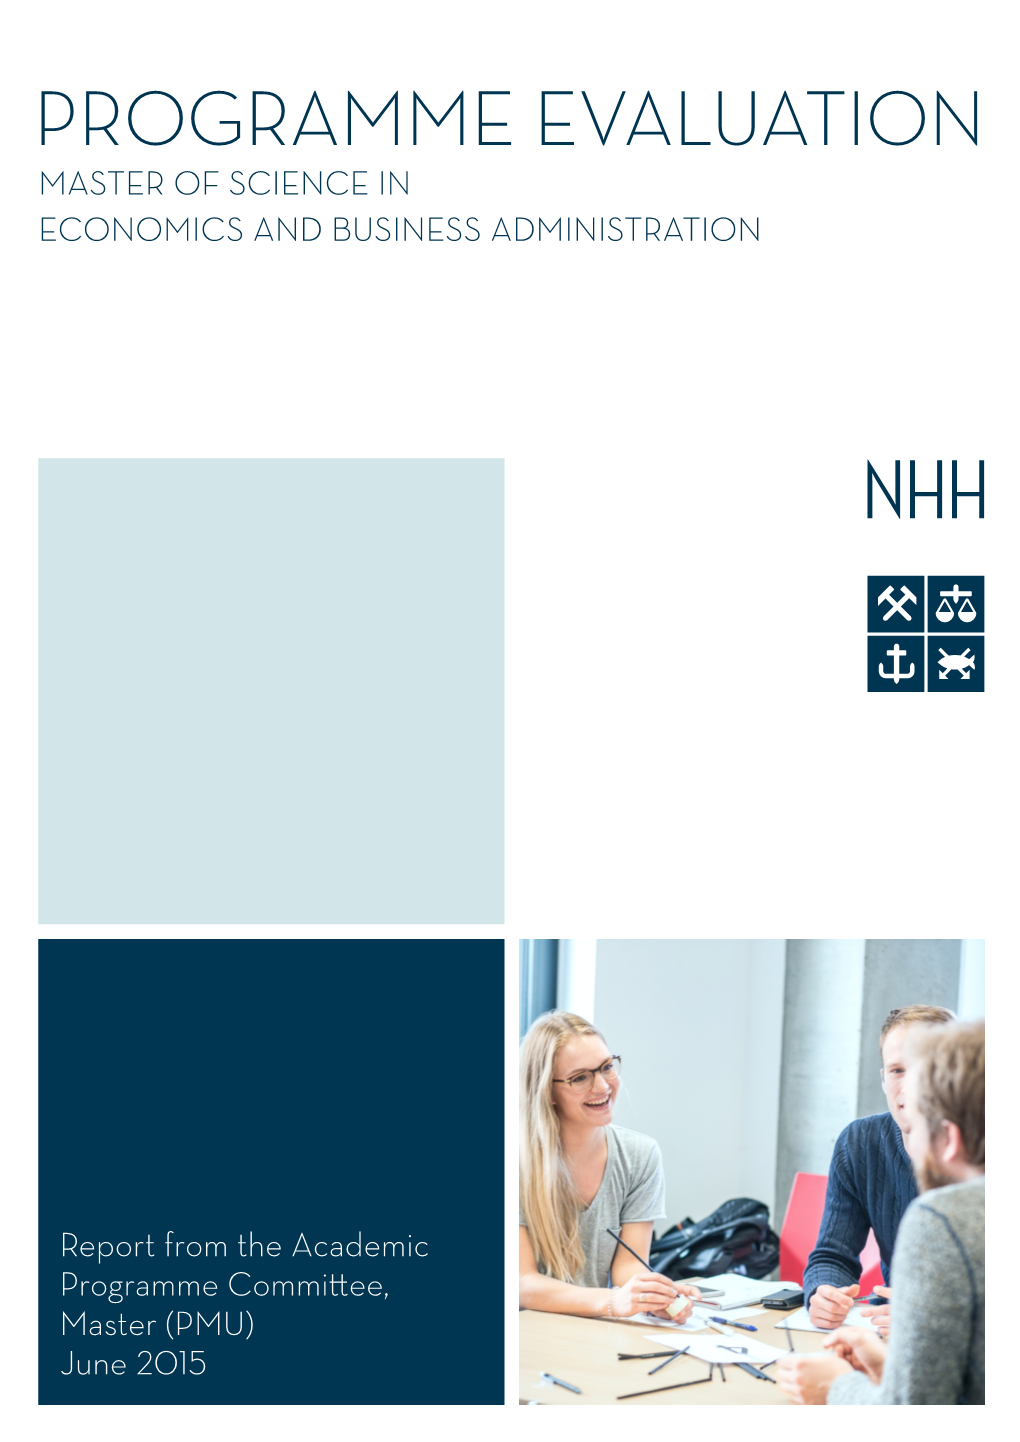 Programme Evaluation Master of Science in Economics and Business Administration